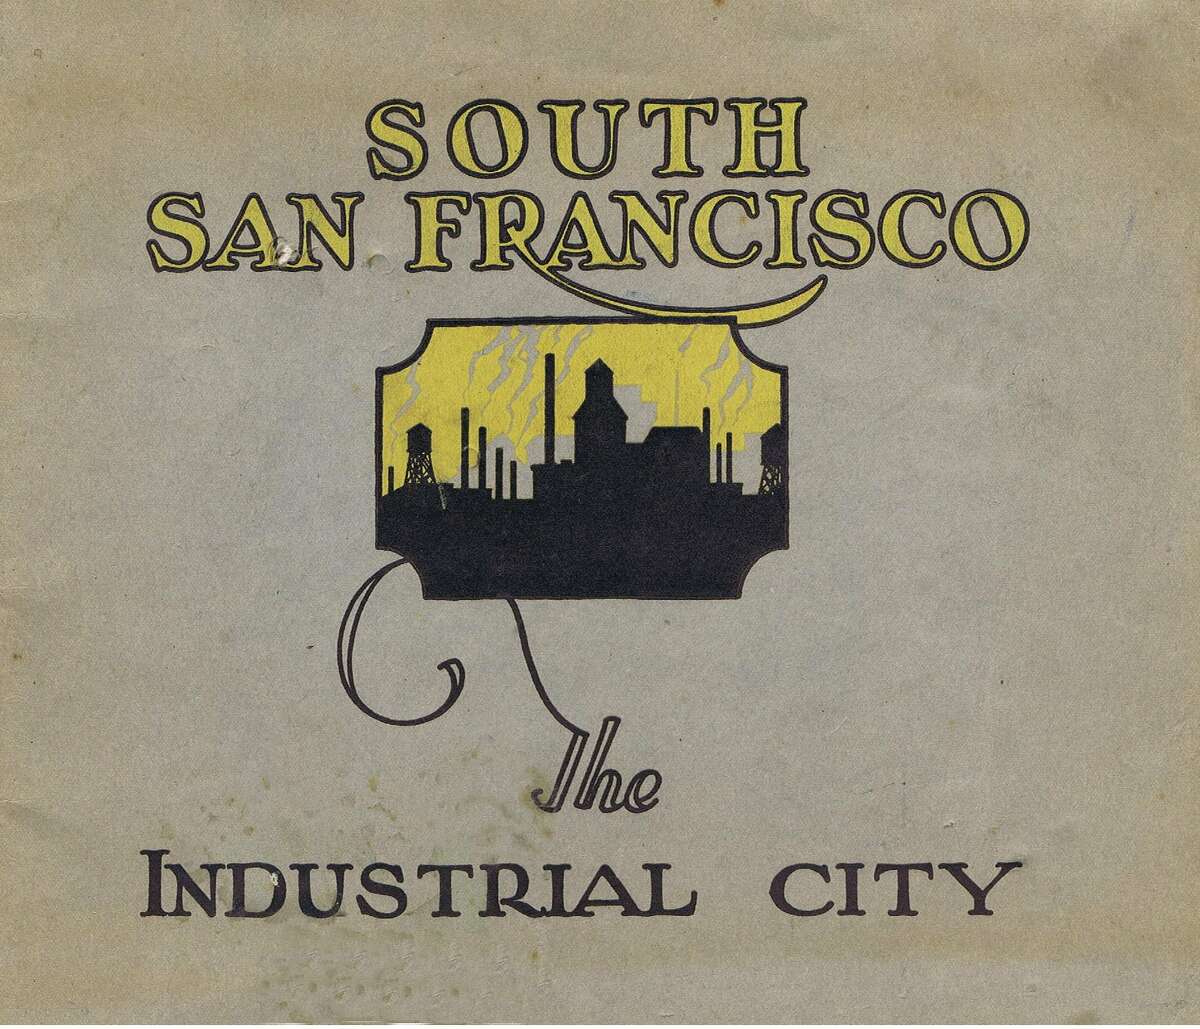 South San Francisco brochure cover, ca. 1920's.From the collection of Bob Bragman.